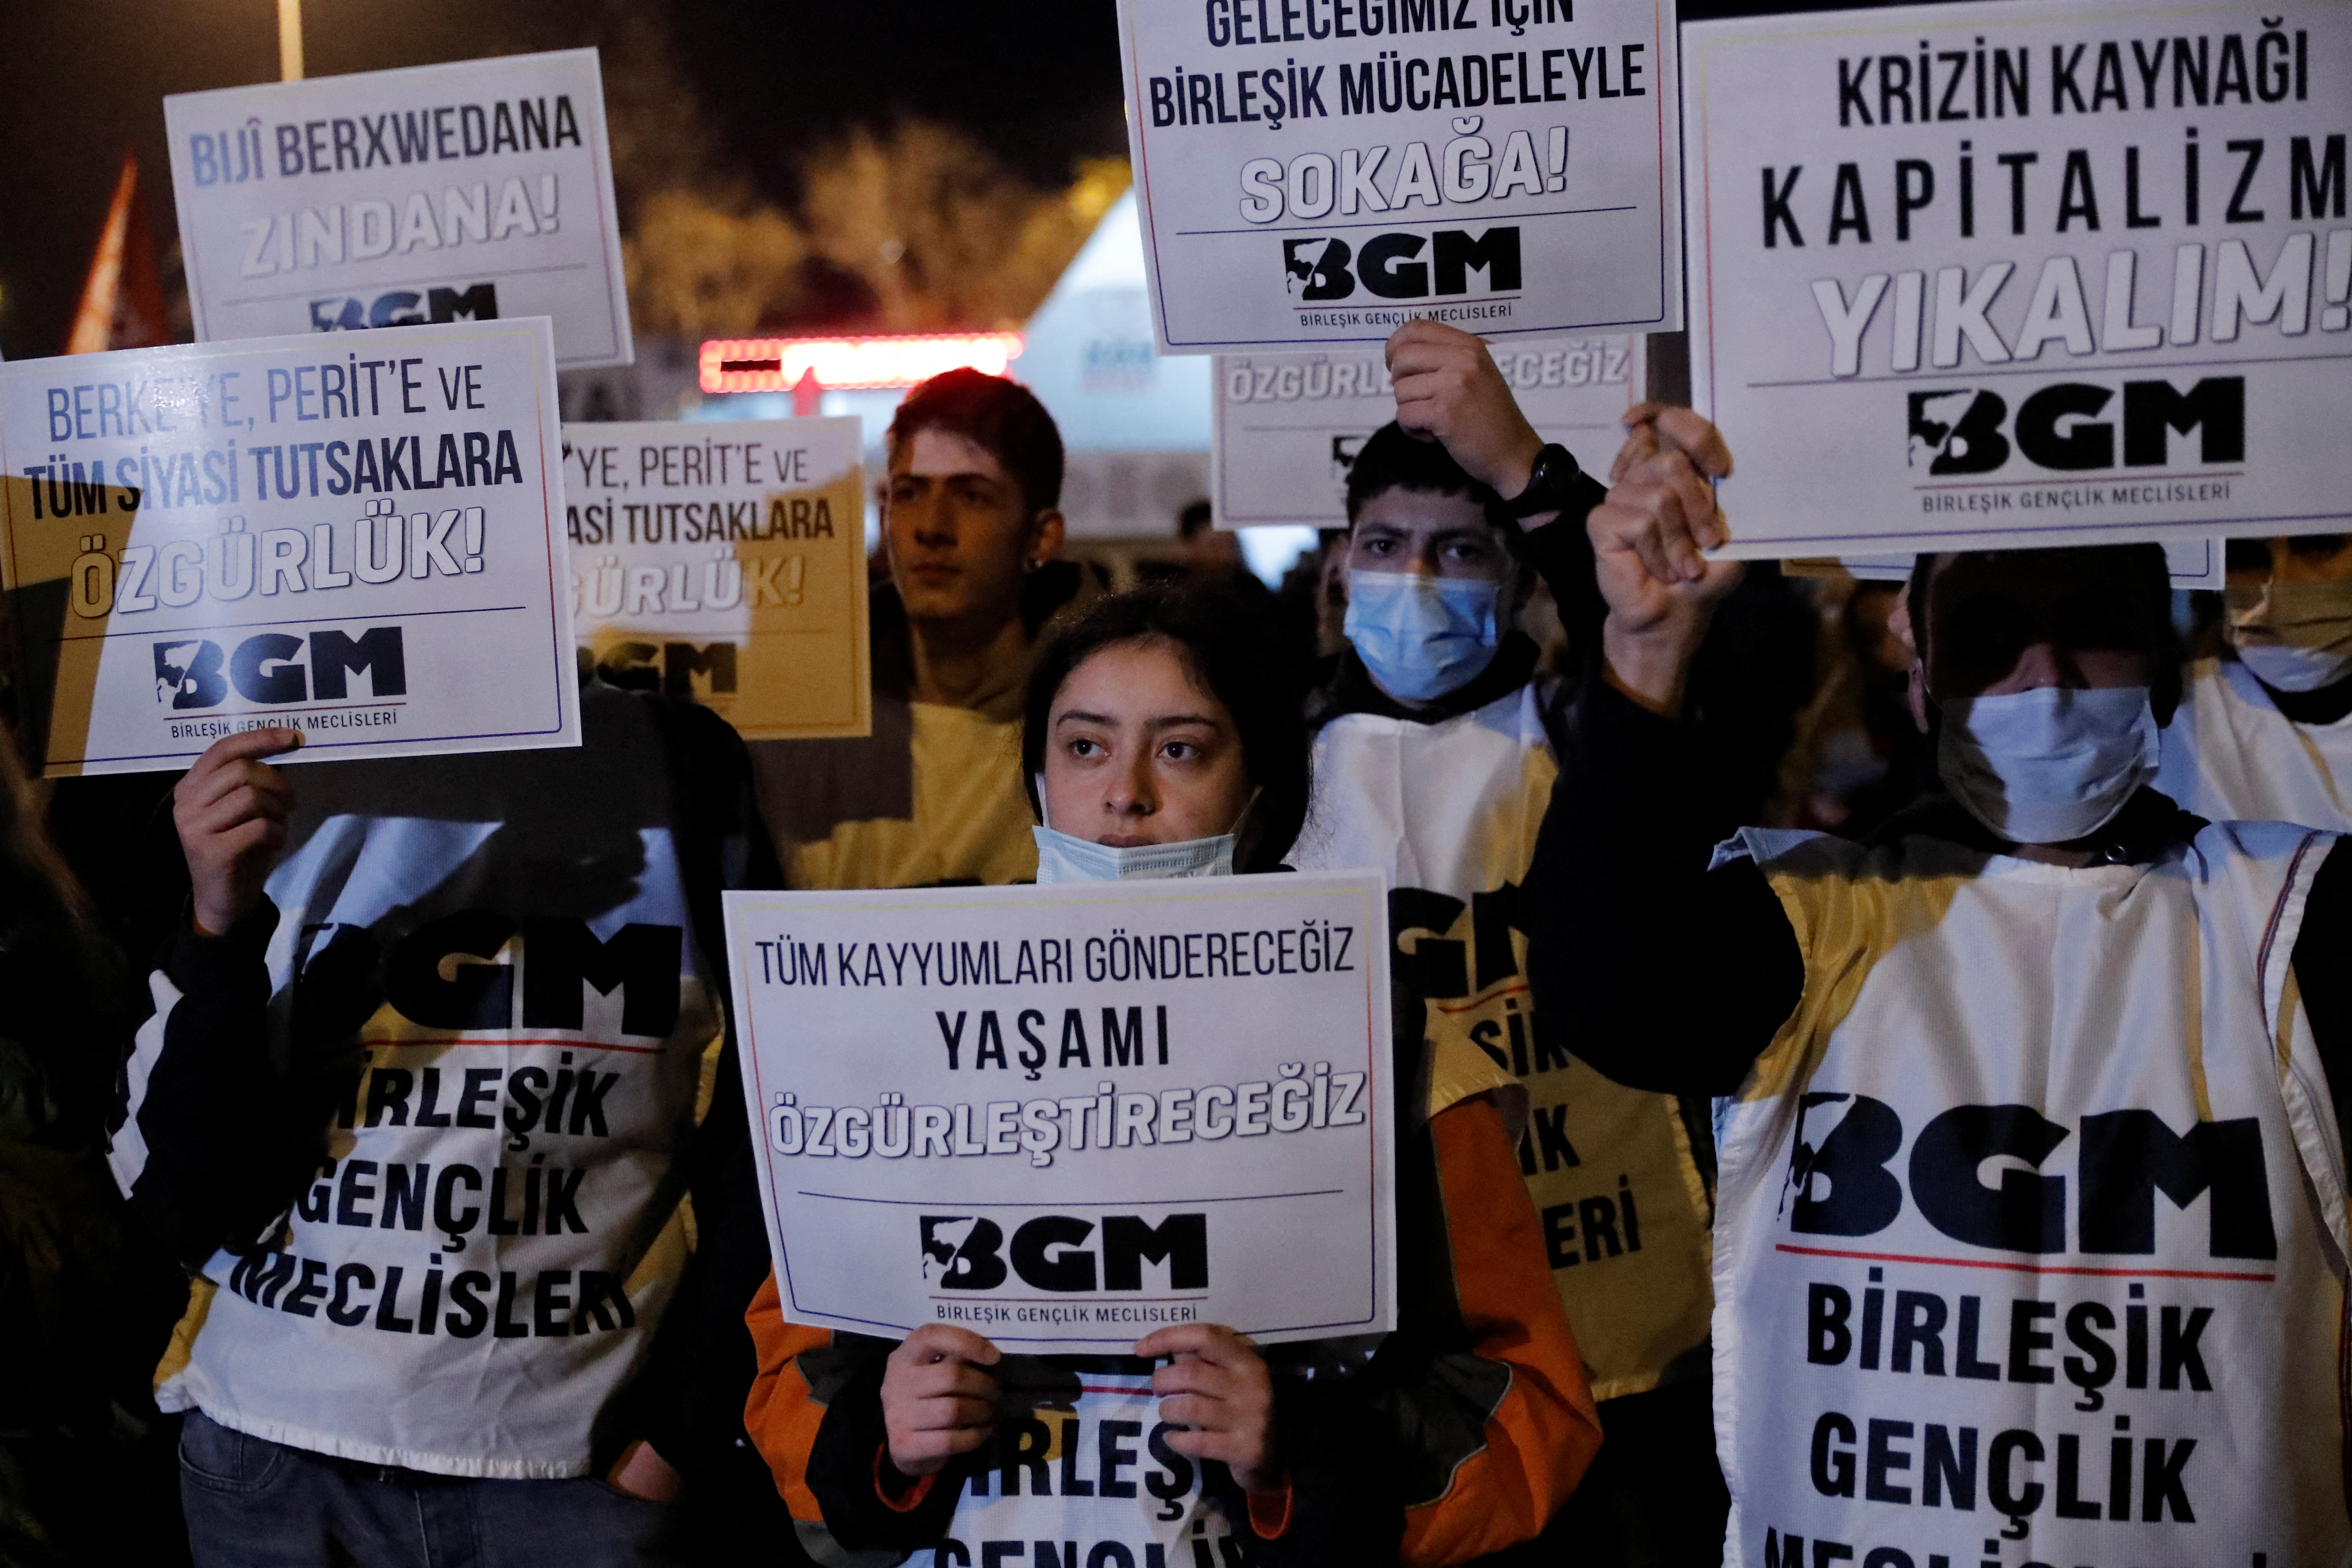 Students protest against the government interference in academia in Istanbul